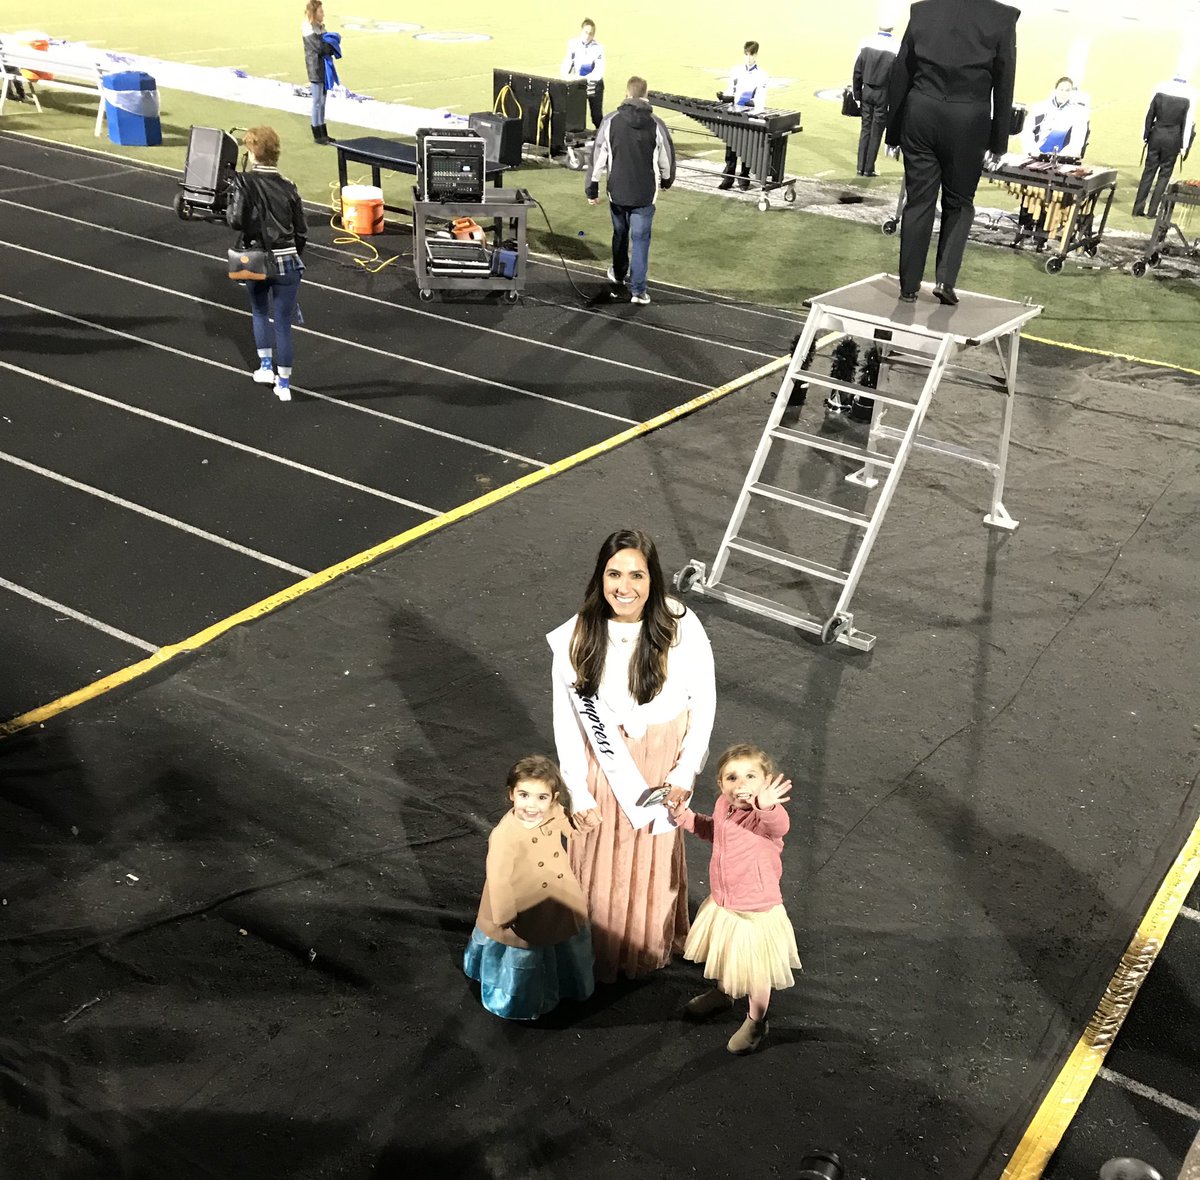 The Rosey sisters were living their best life tonight! Go Blackhawks!